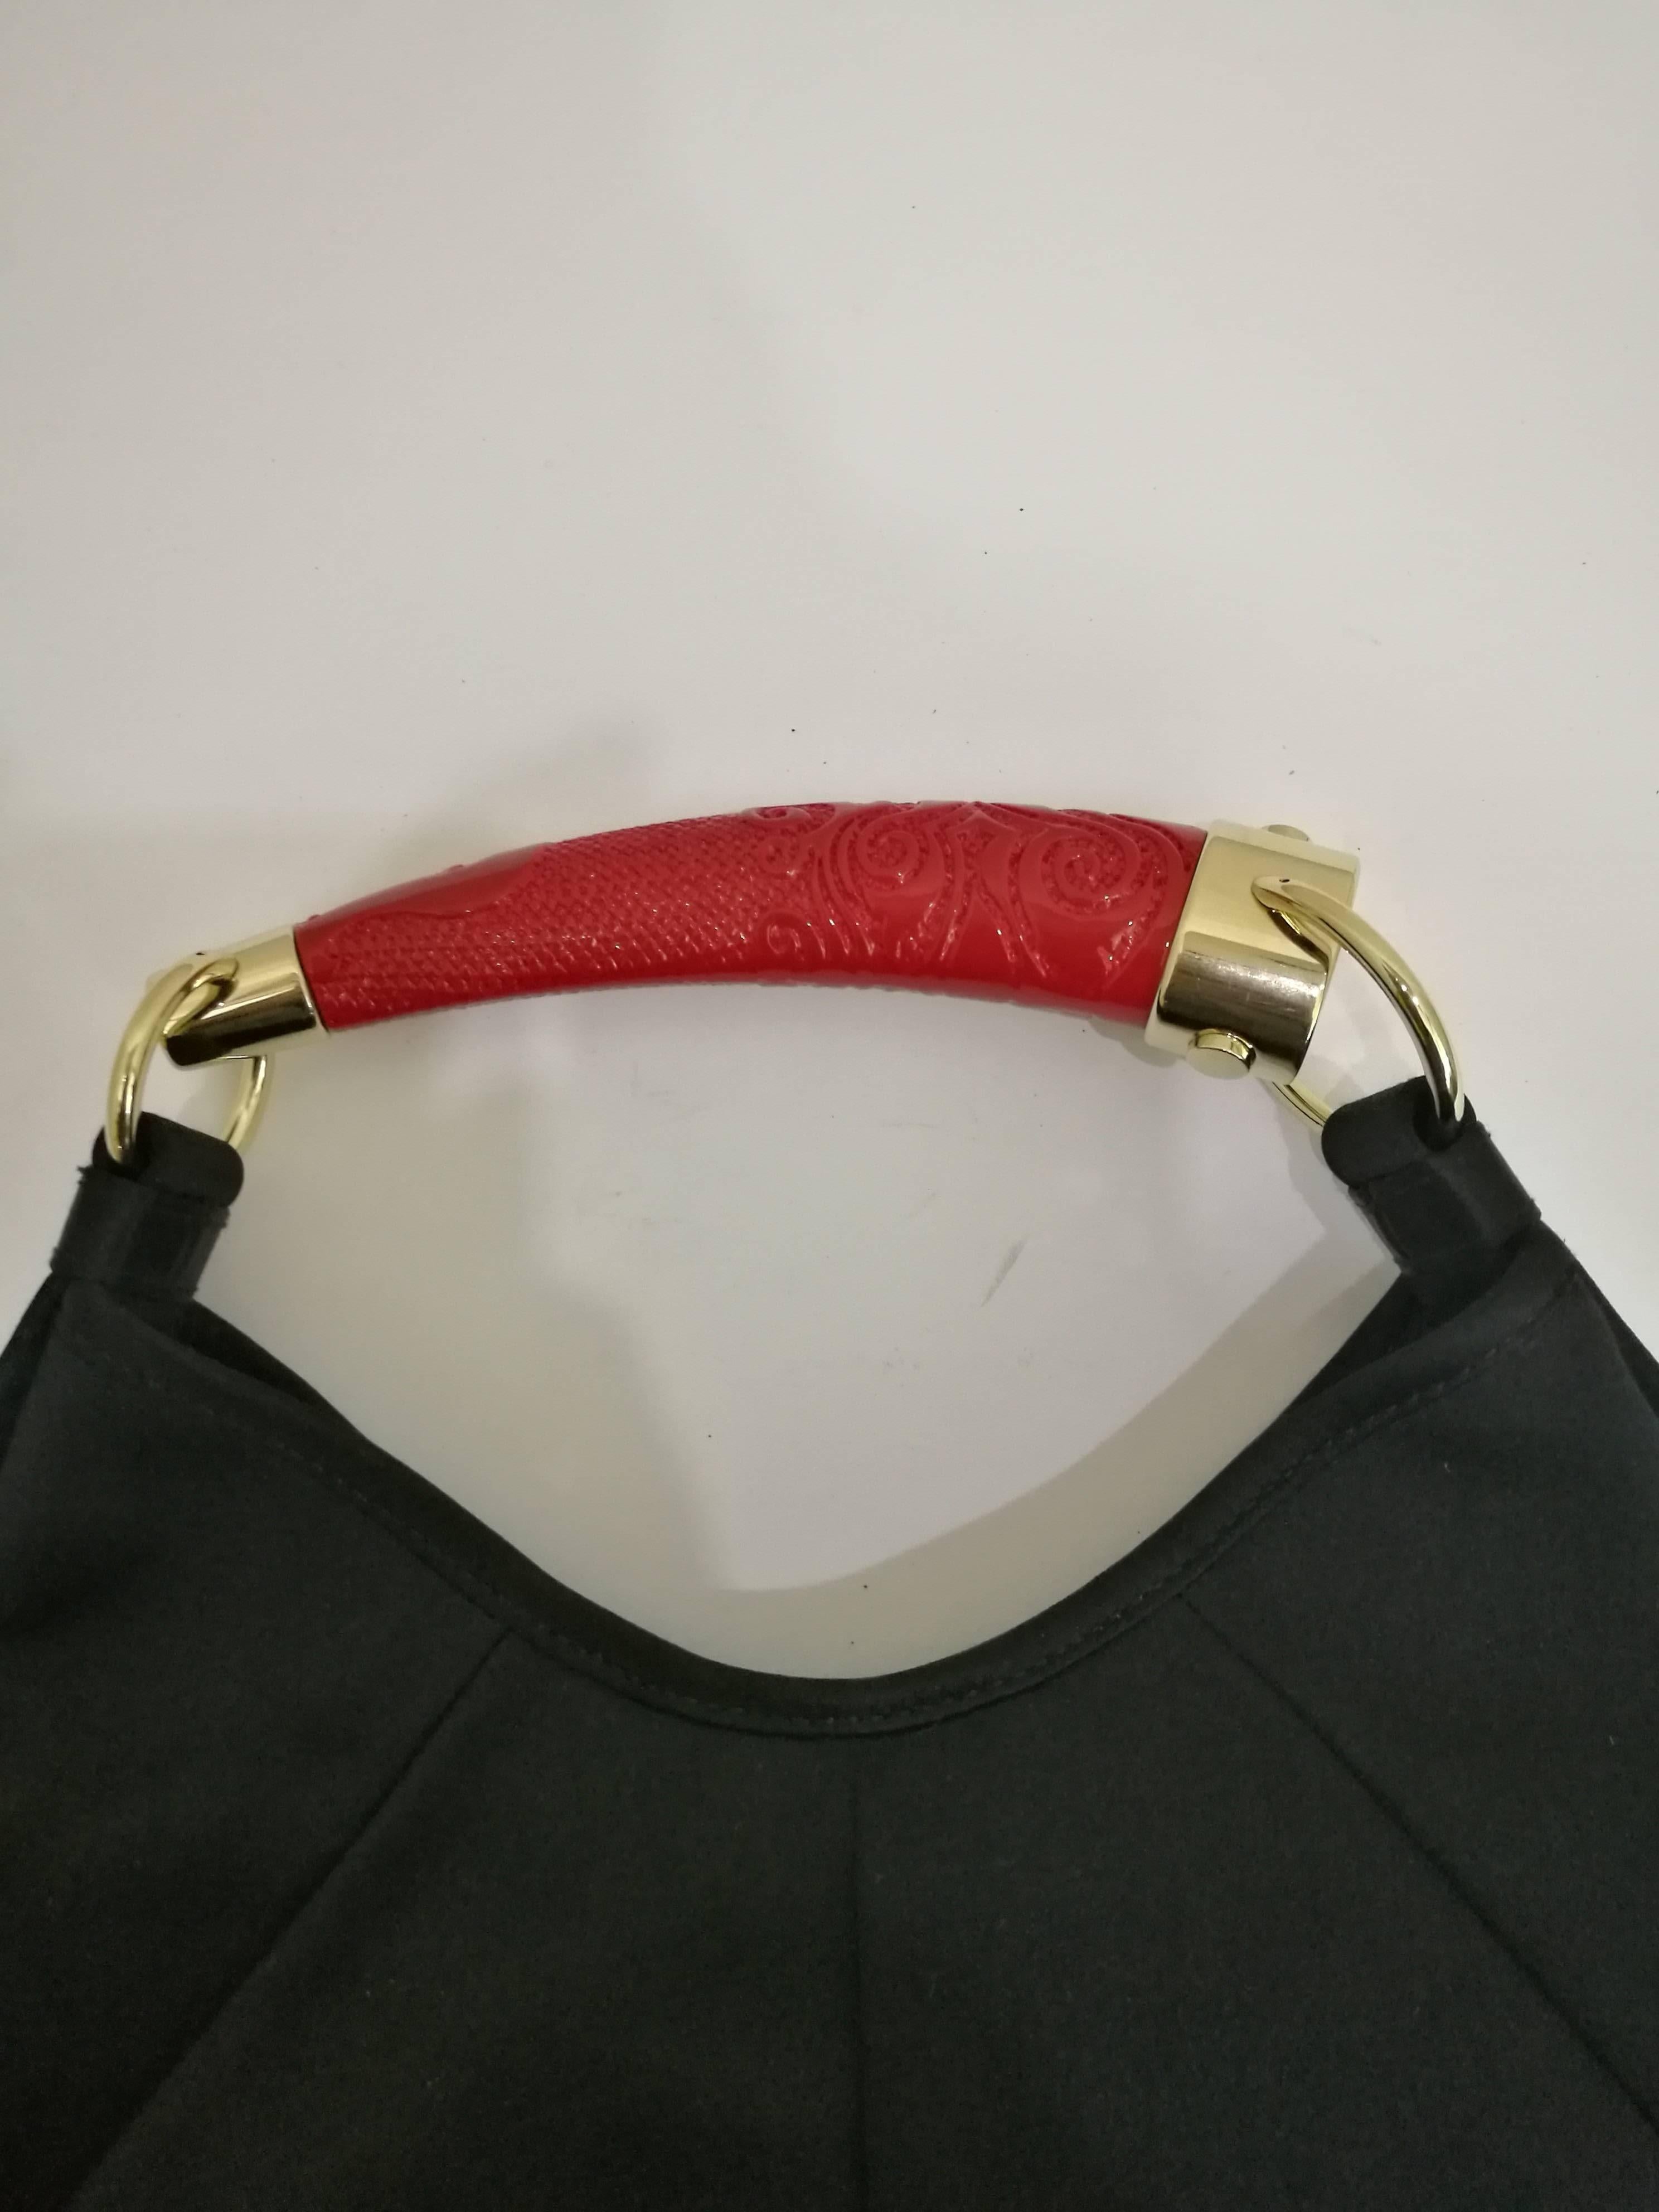 Shoulder bag Yves Saint Laurent Rive Gauche Mombasa model in black leather embellished with a gilded metal handle and red resin horn so chiseled arabesque motifs in relief.
- The bag is centered round a small medallion in red resin holding a black